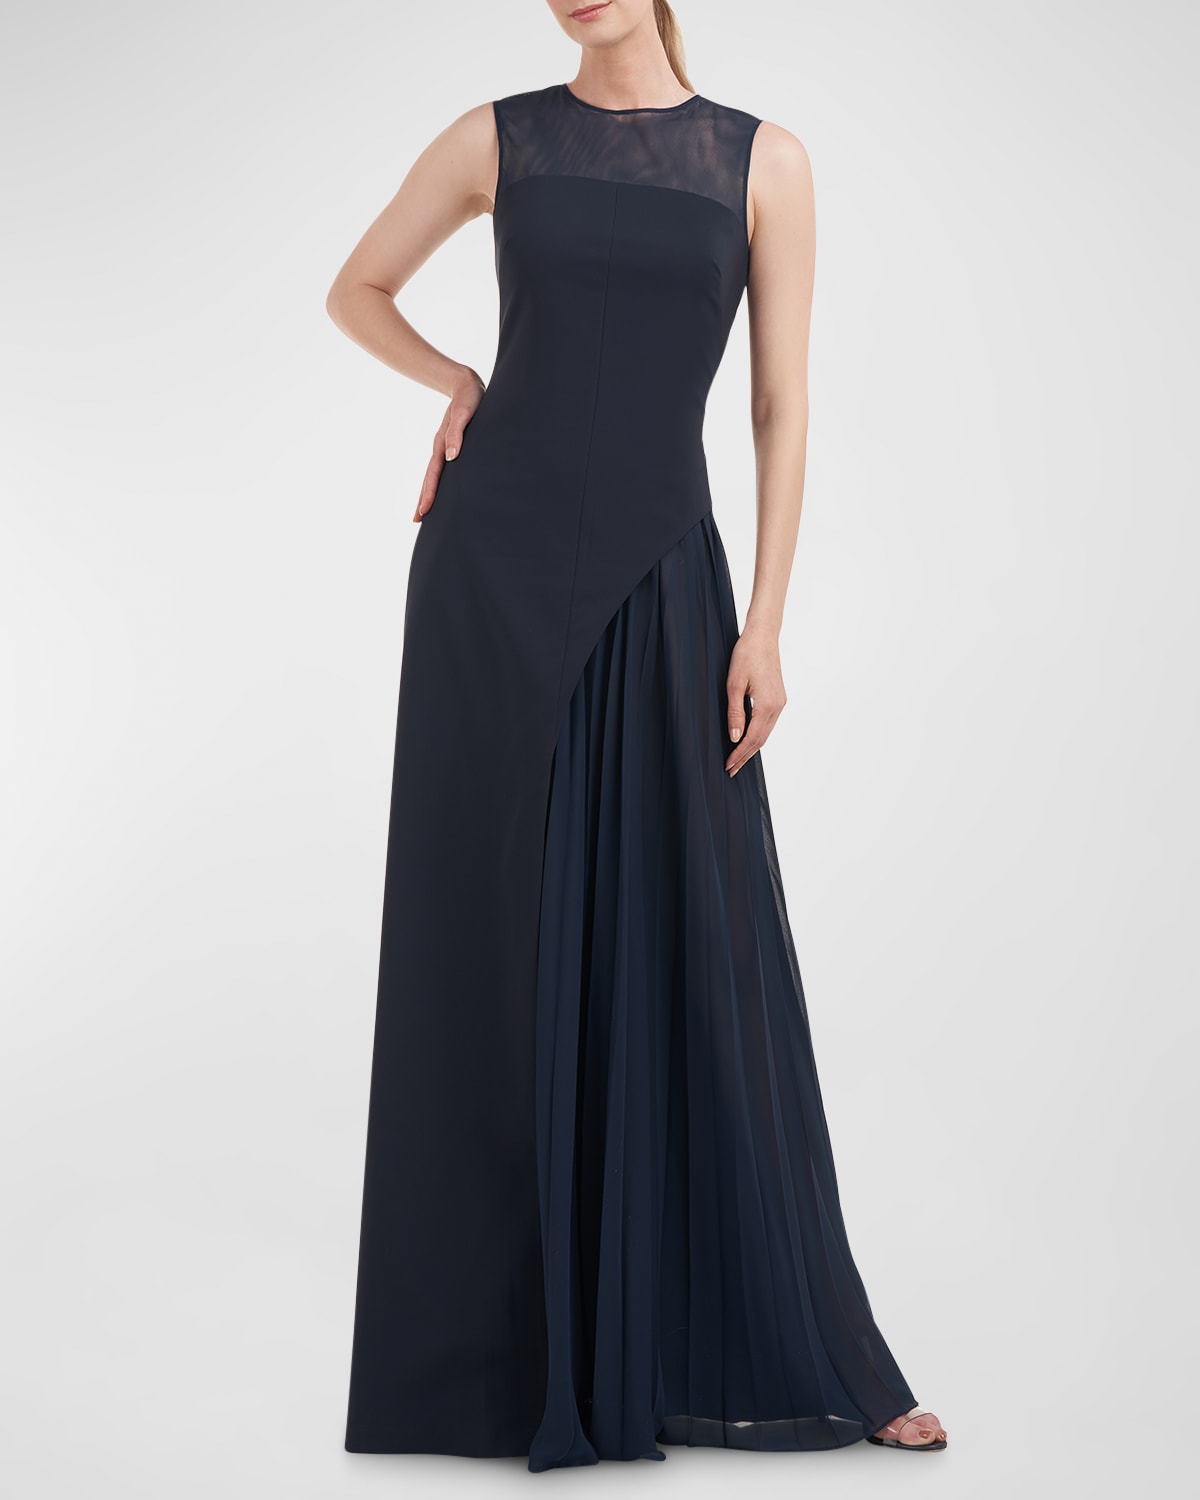 Kay Unger New York Layered A-Line Crepe Illusion Gown